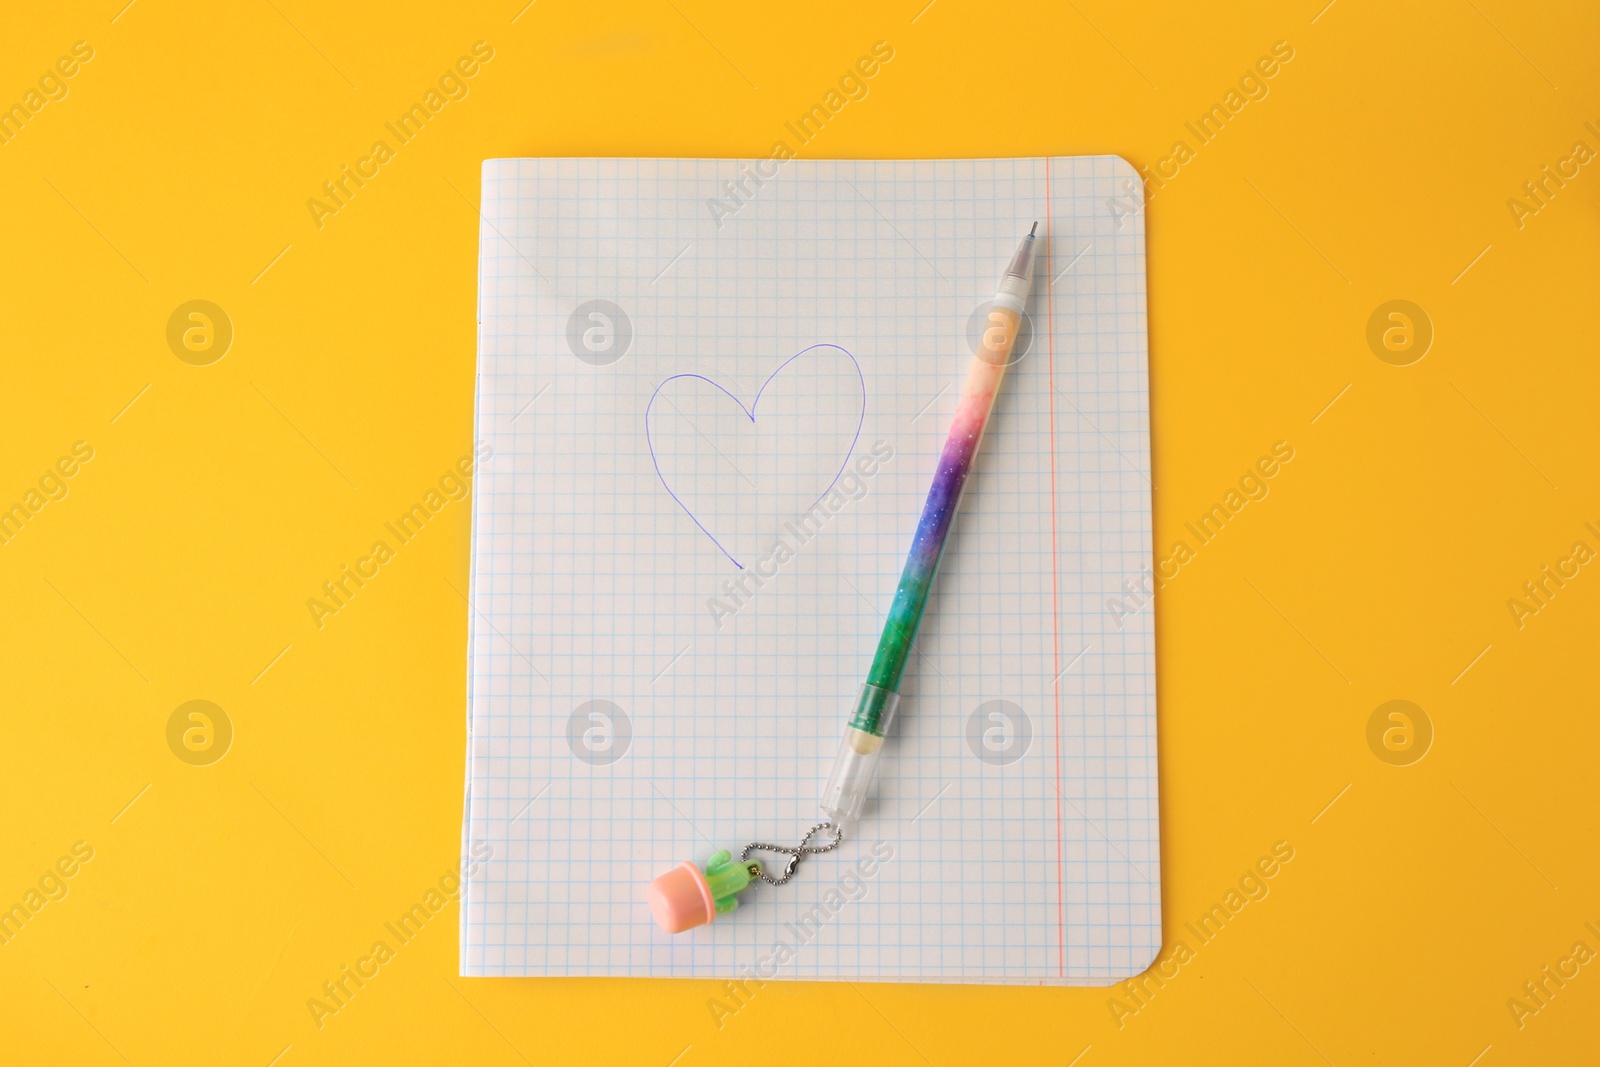 Photo of Heart drawn on checkered paper with erasable pen against yellow background, top view